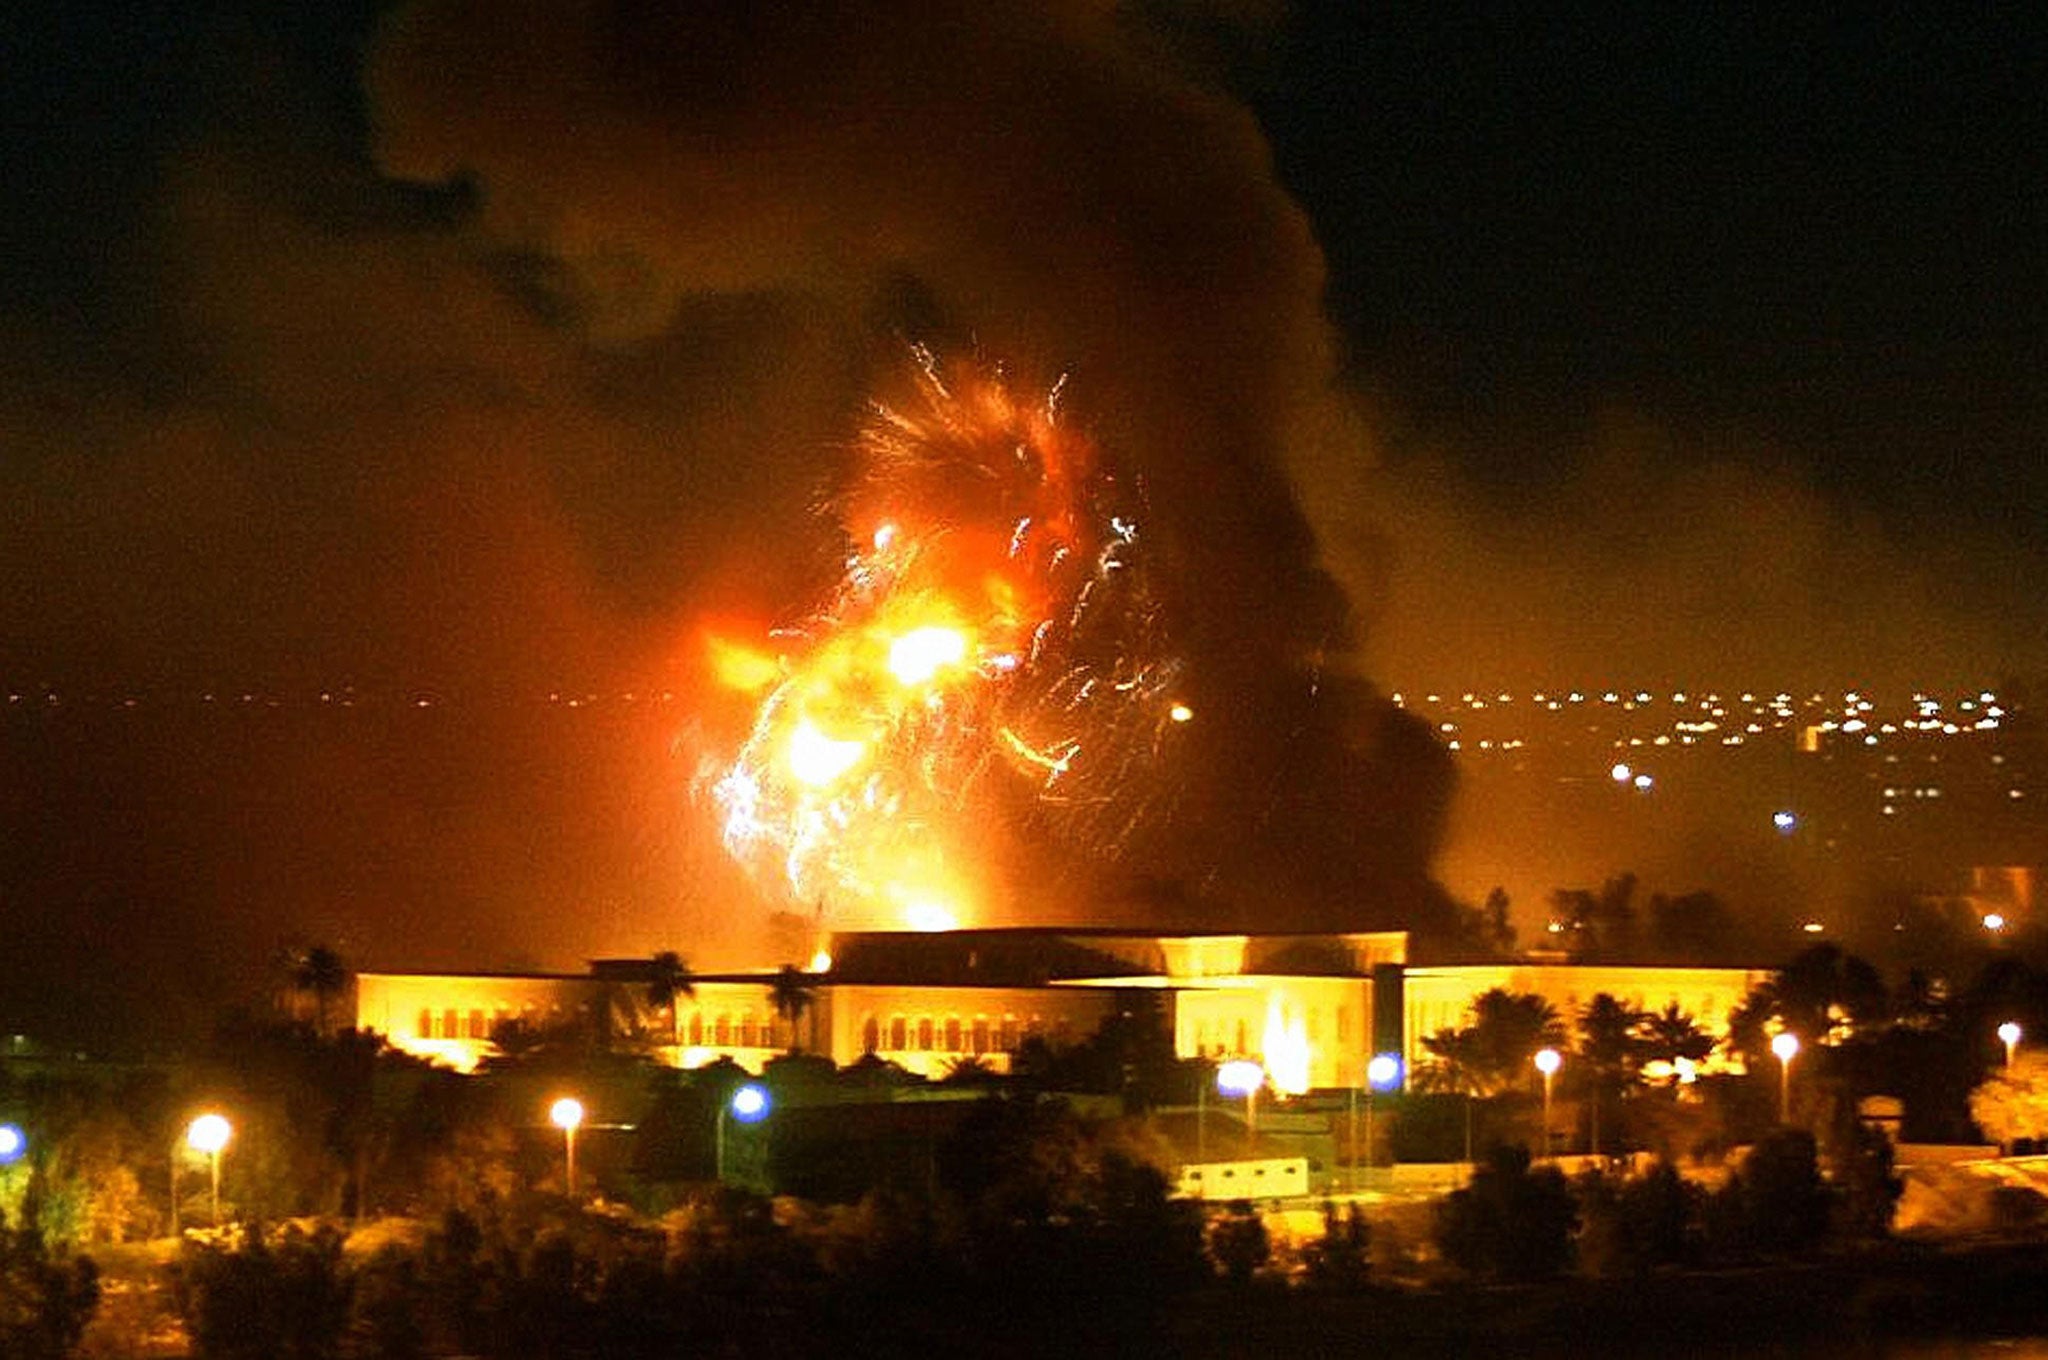 Smoke covers the presidential palace compound during a massive US-led air raid in Baghdad 21 March 2003.